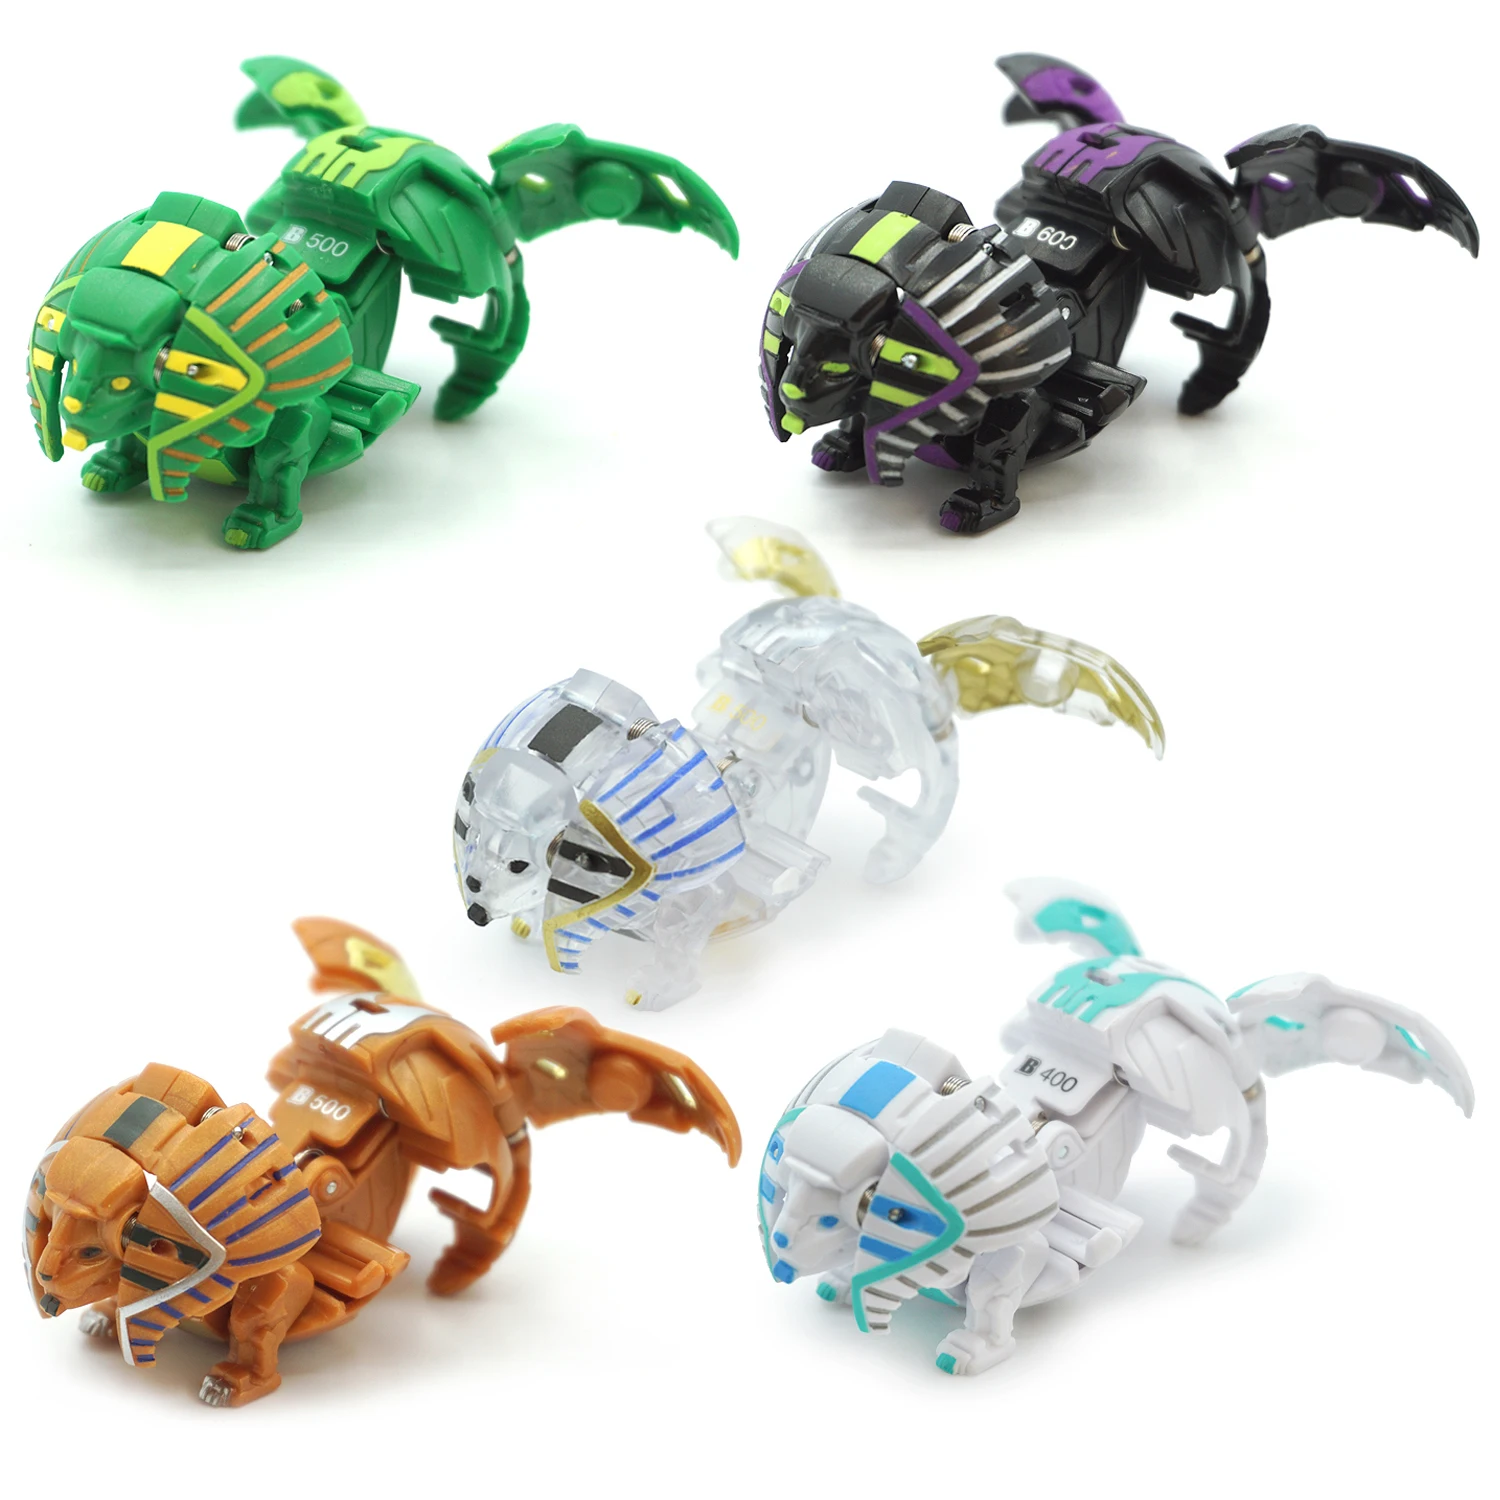 

Bakugan Armored Alliance New Style Genuine PHAROL Deformable Battle Toys Action Figure Model Boy Gifts